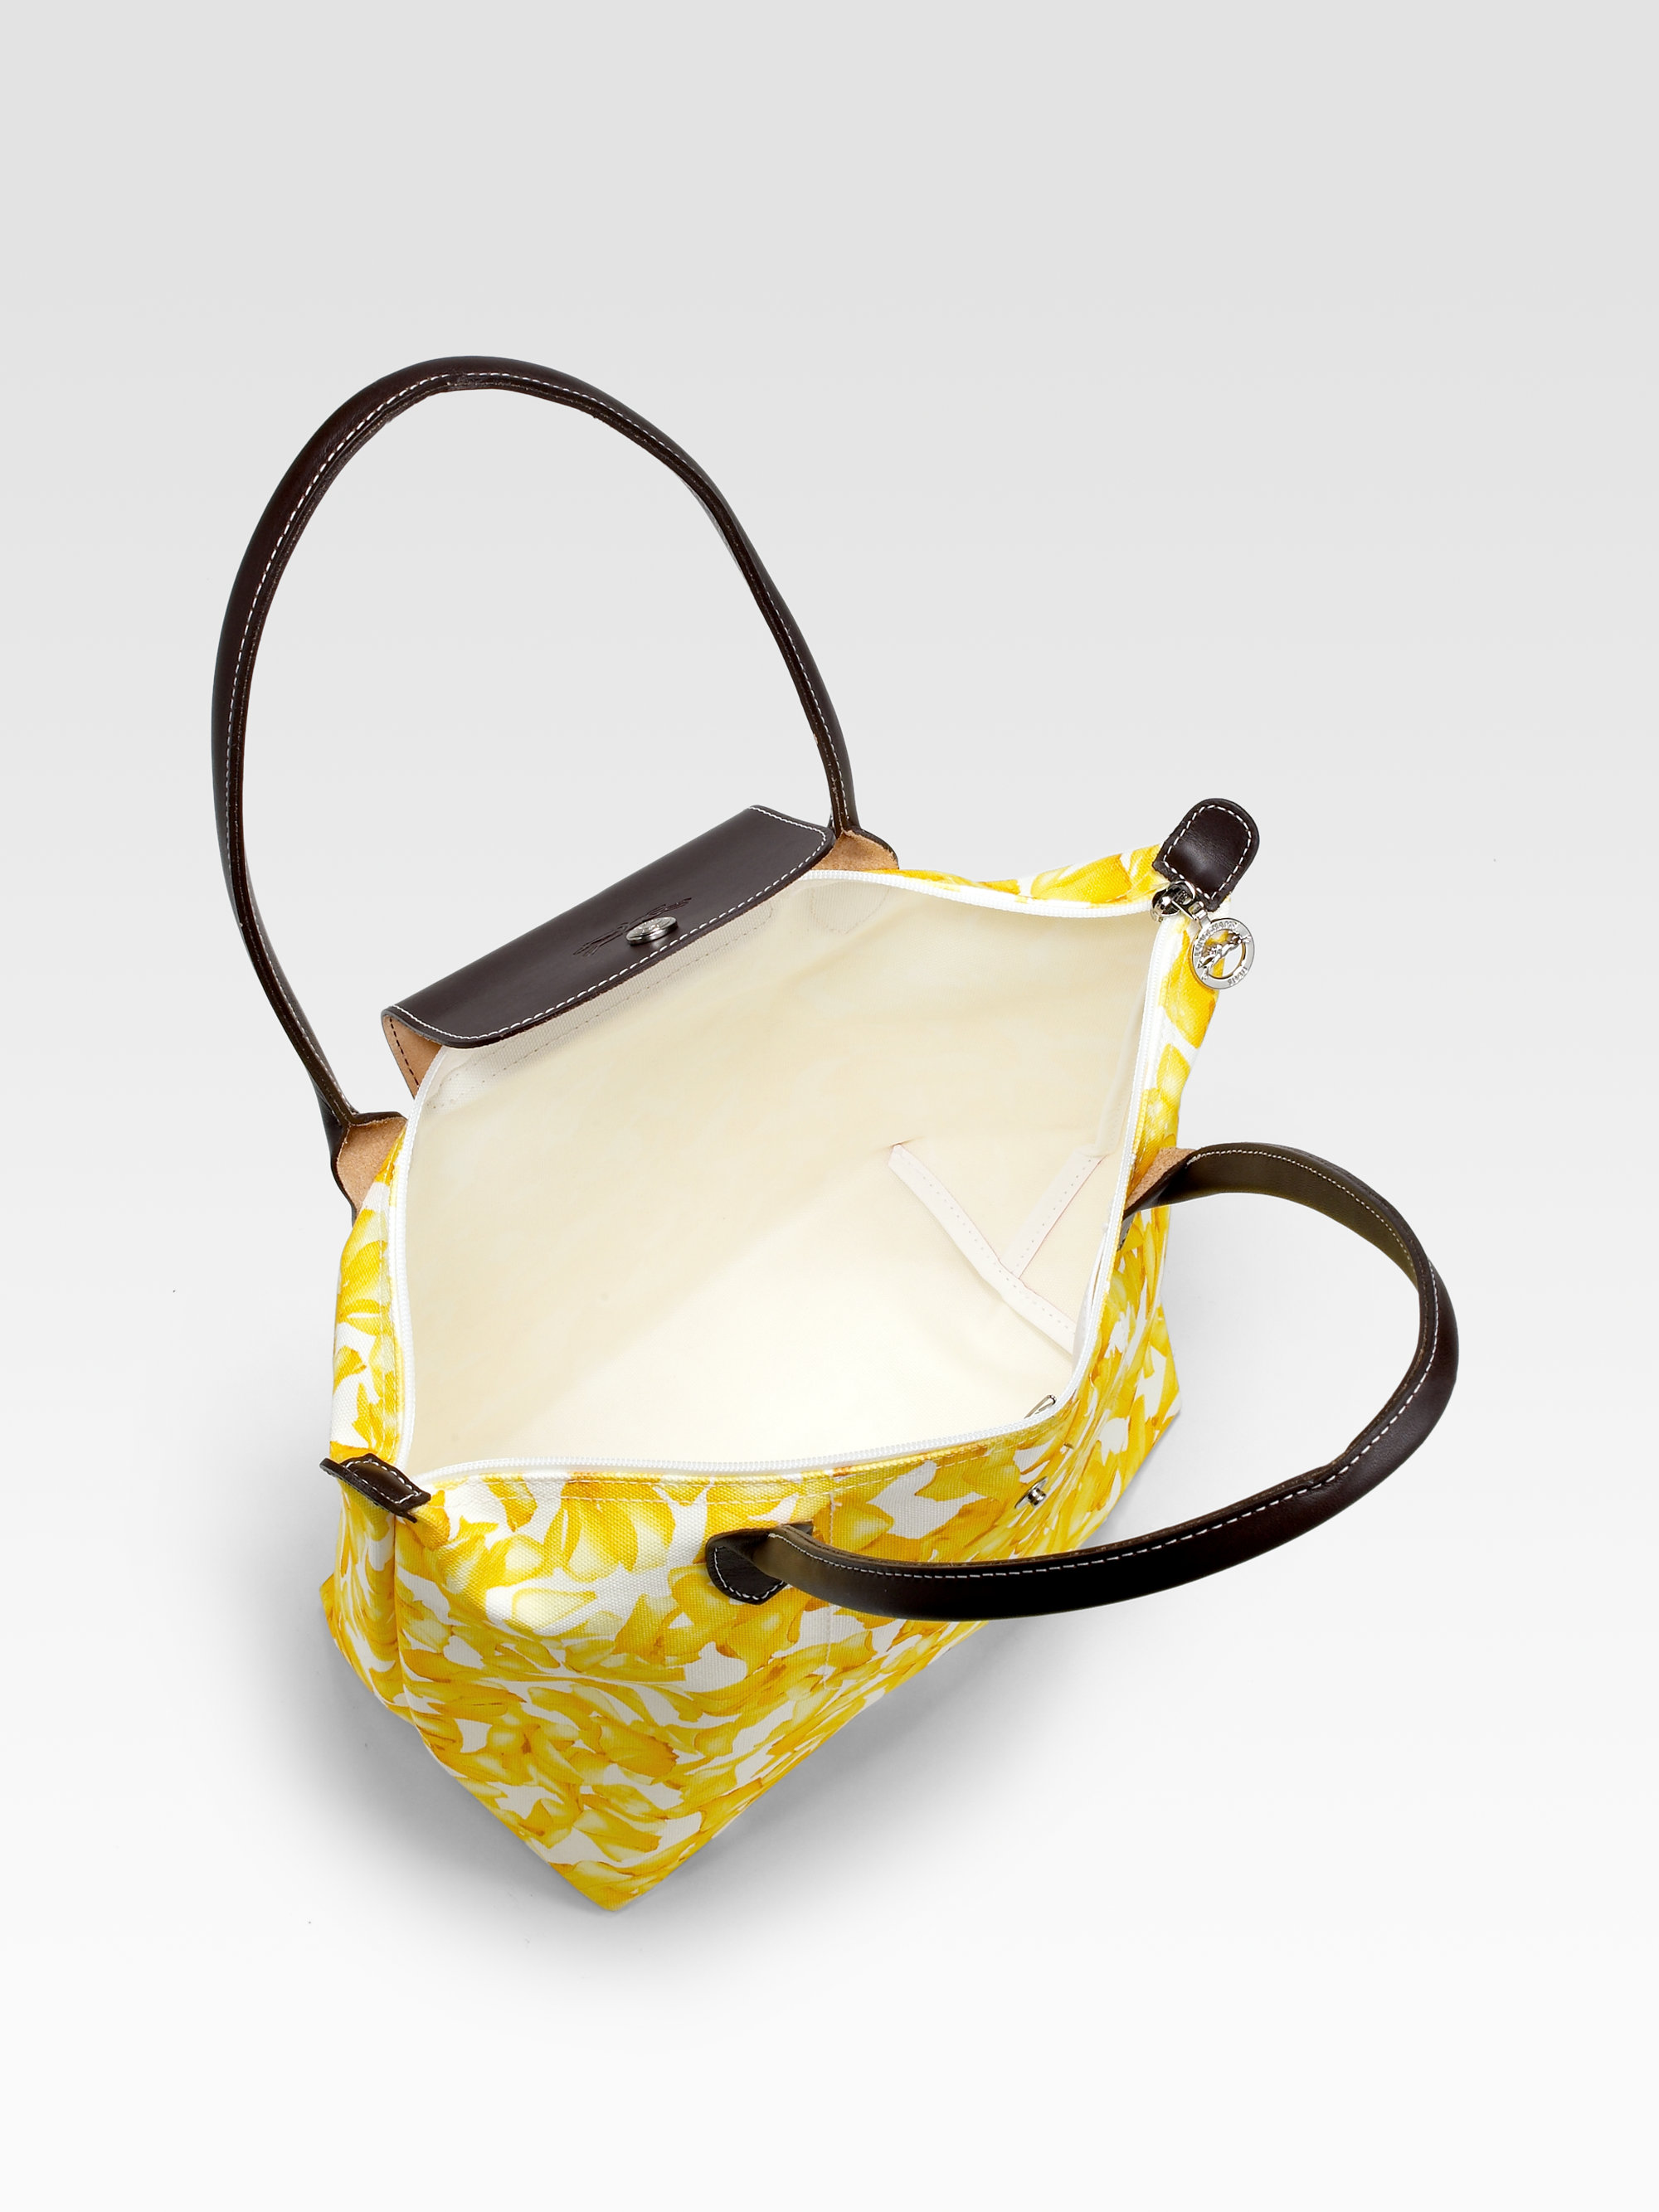 Lyst - Longchamp Darshan Small Tote in Yellow